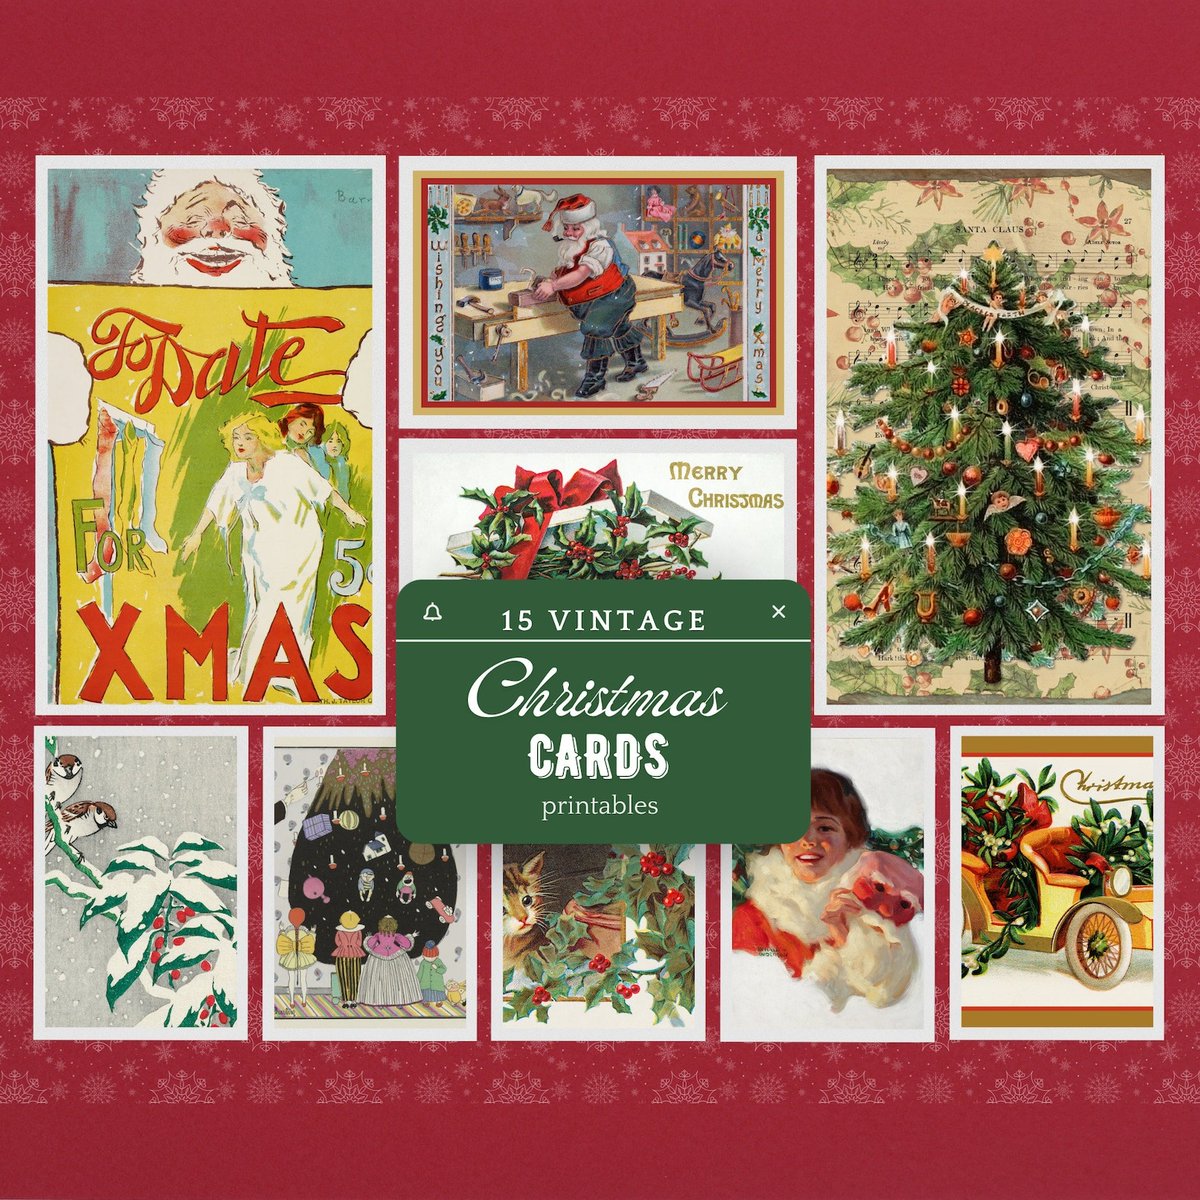 It's too late to order from me in time for Christmas now, but did you know that I sell some stunning vintage Christmas cards? Digital downloads only, so quick and easy! 15 cards for just £6. Take a look 👉toteallyvintage.etsy.com/listing/132112…

#christmascards #MHHSBD #vintage #greetingcards